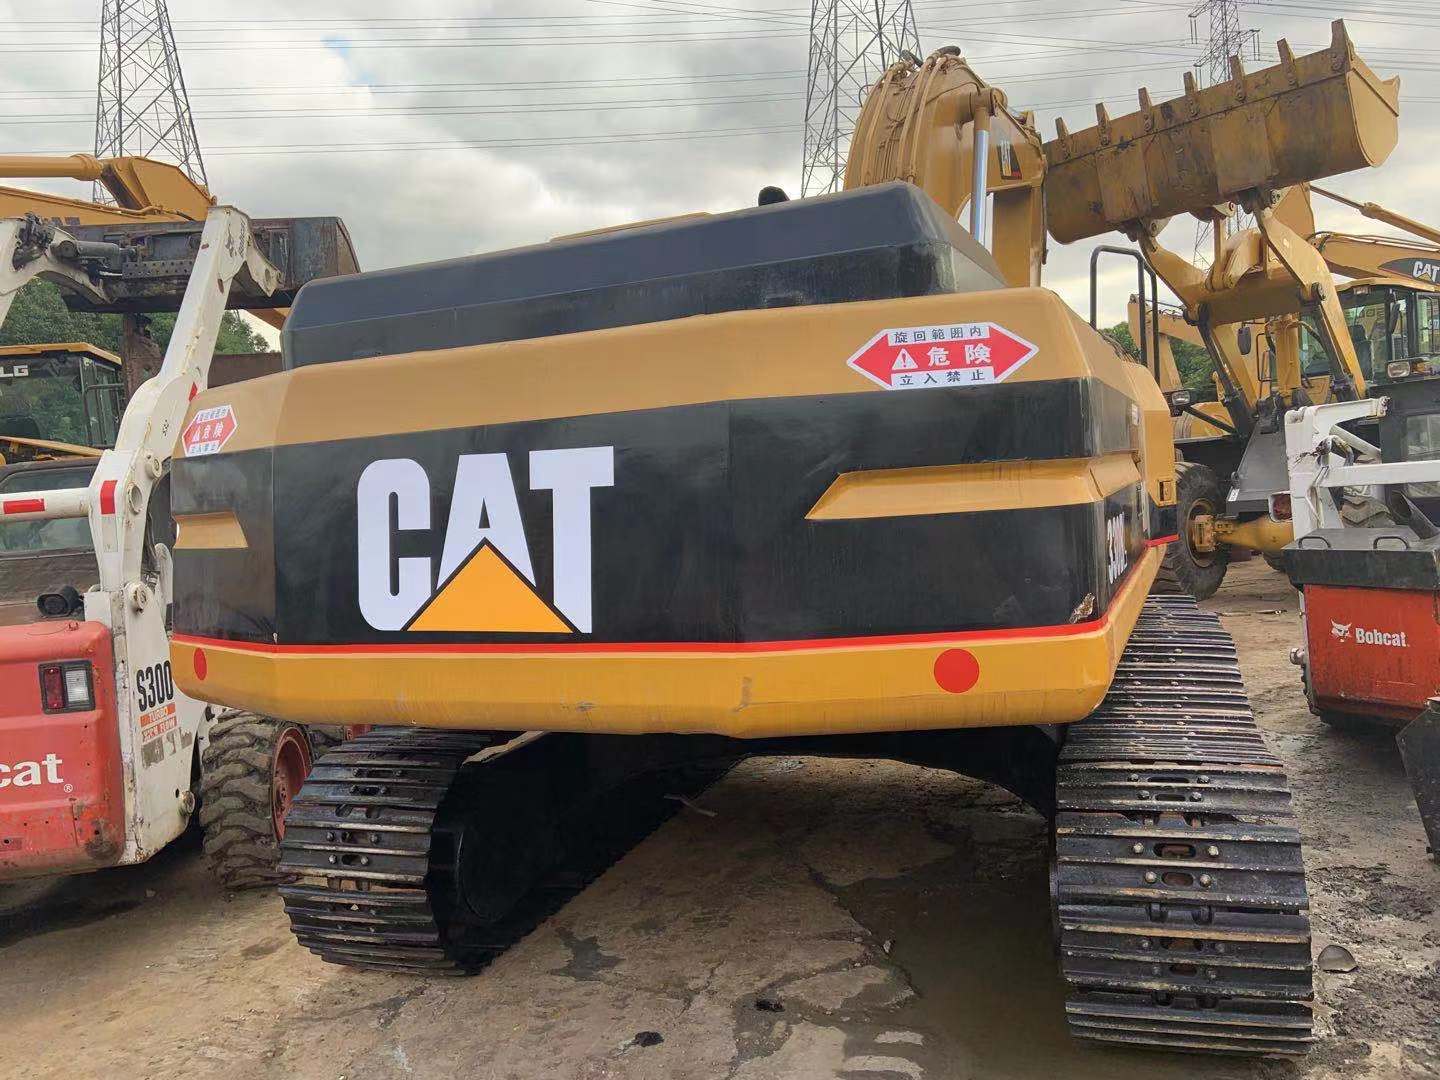 Used/Secondhand Cat 330bl/330b/330 Excavator with High Quality in Cheap Price